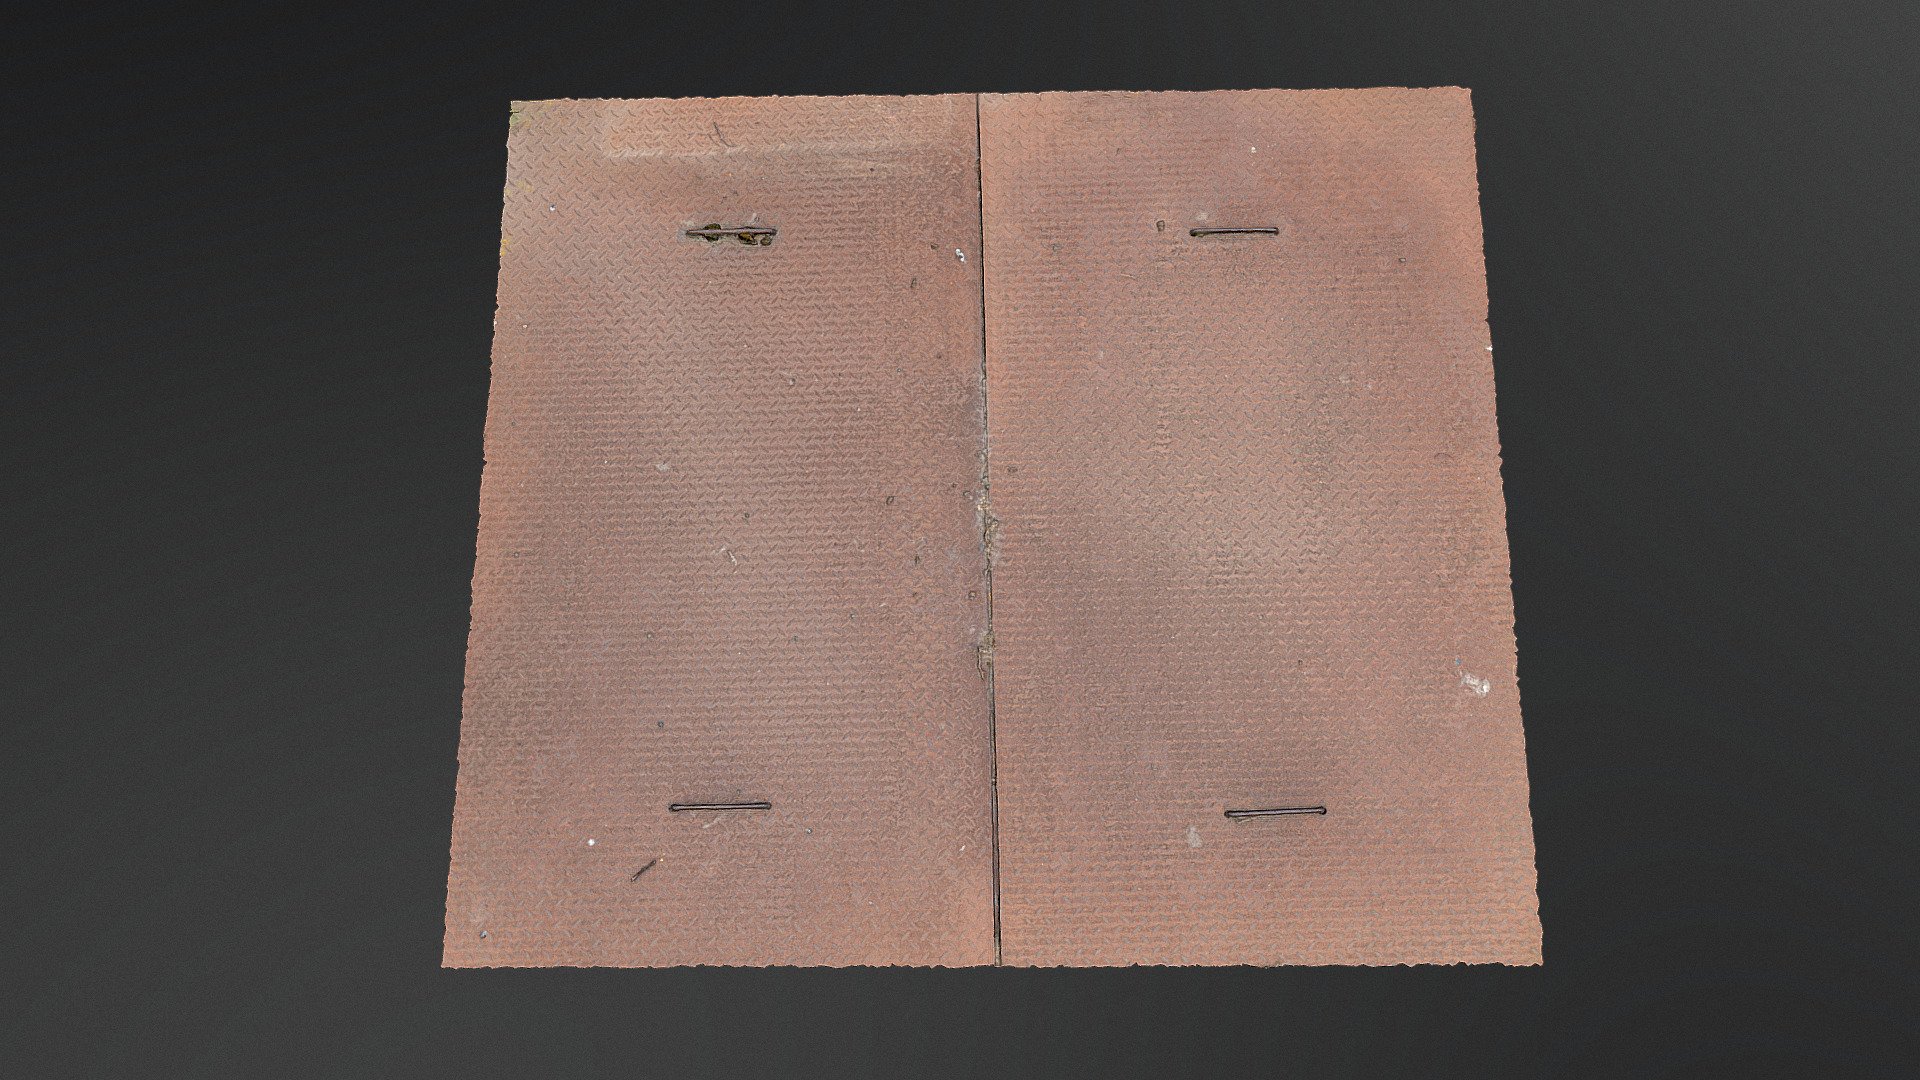 Squre door Rusty metal utility industrial ground cover lid hatch manhole
About 2m wide. 

Photogrammetry scan 160x24MP
16K texture 3d model